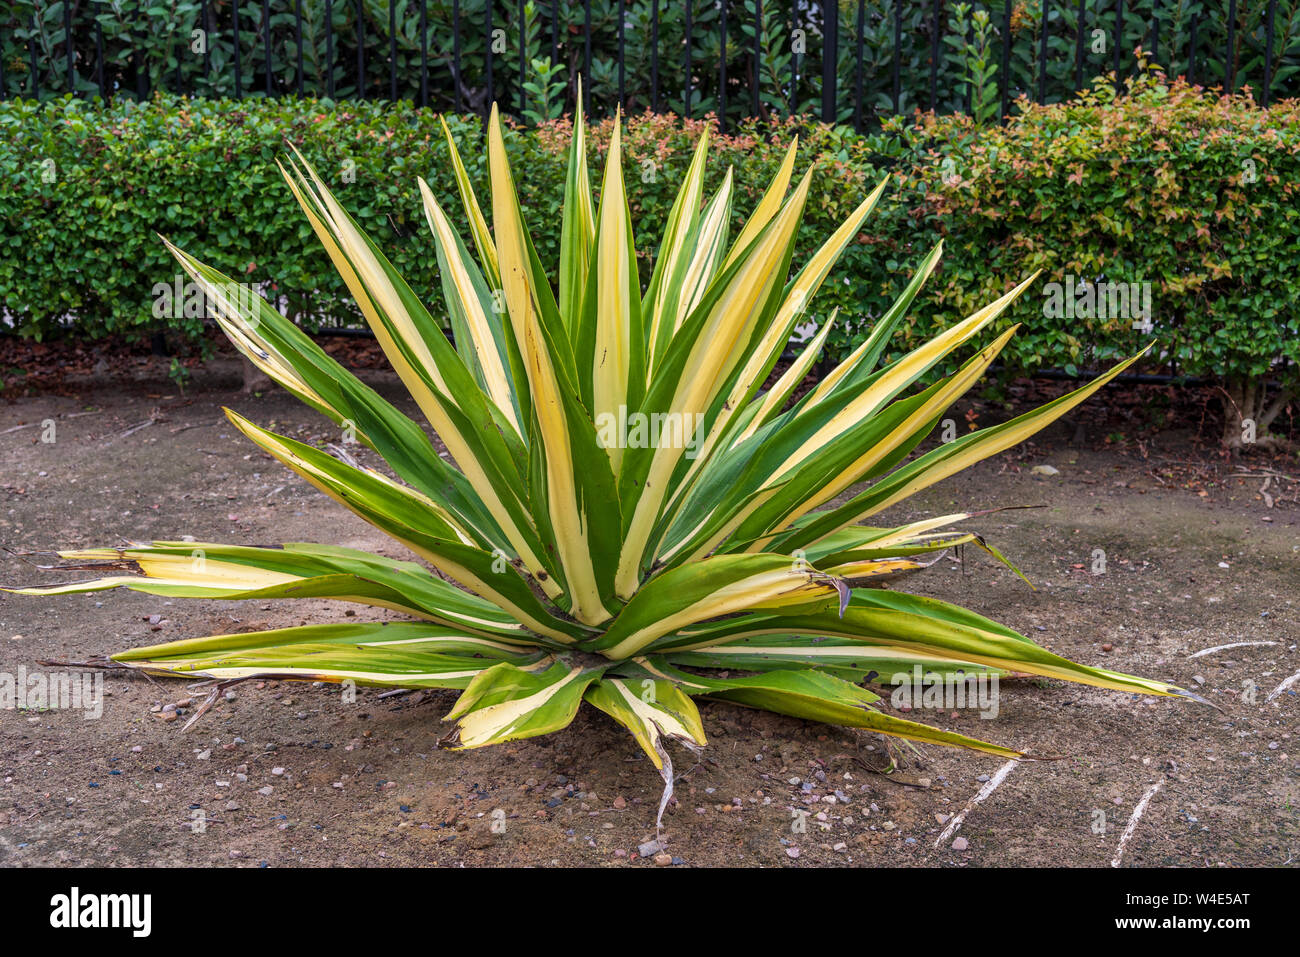 Yucca plant with long gene and yellow leaves with hedge background. Stock Photo